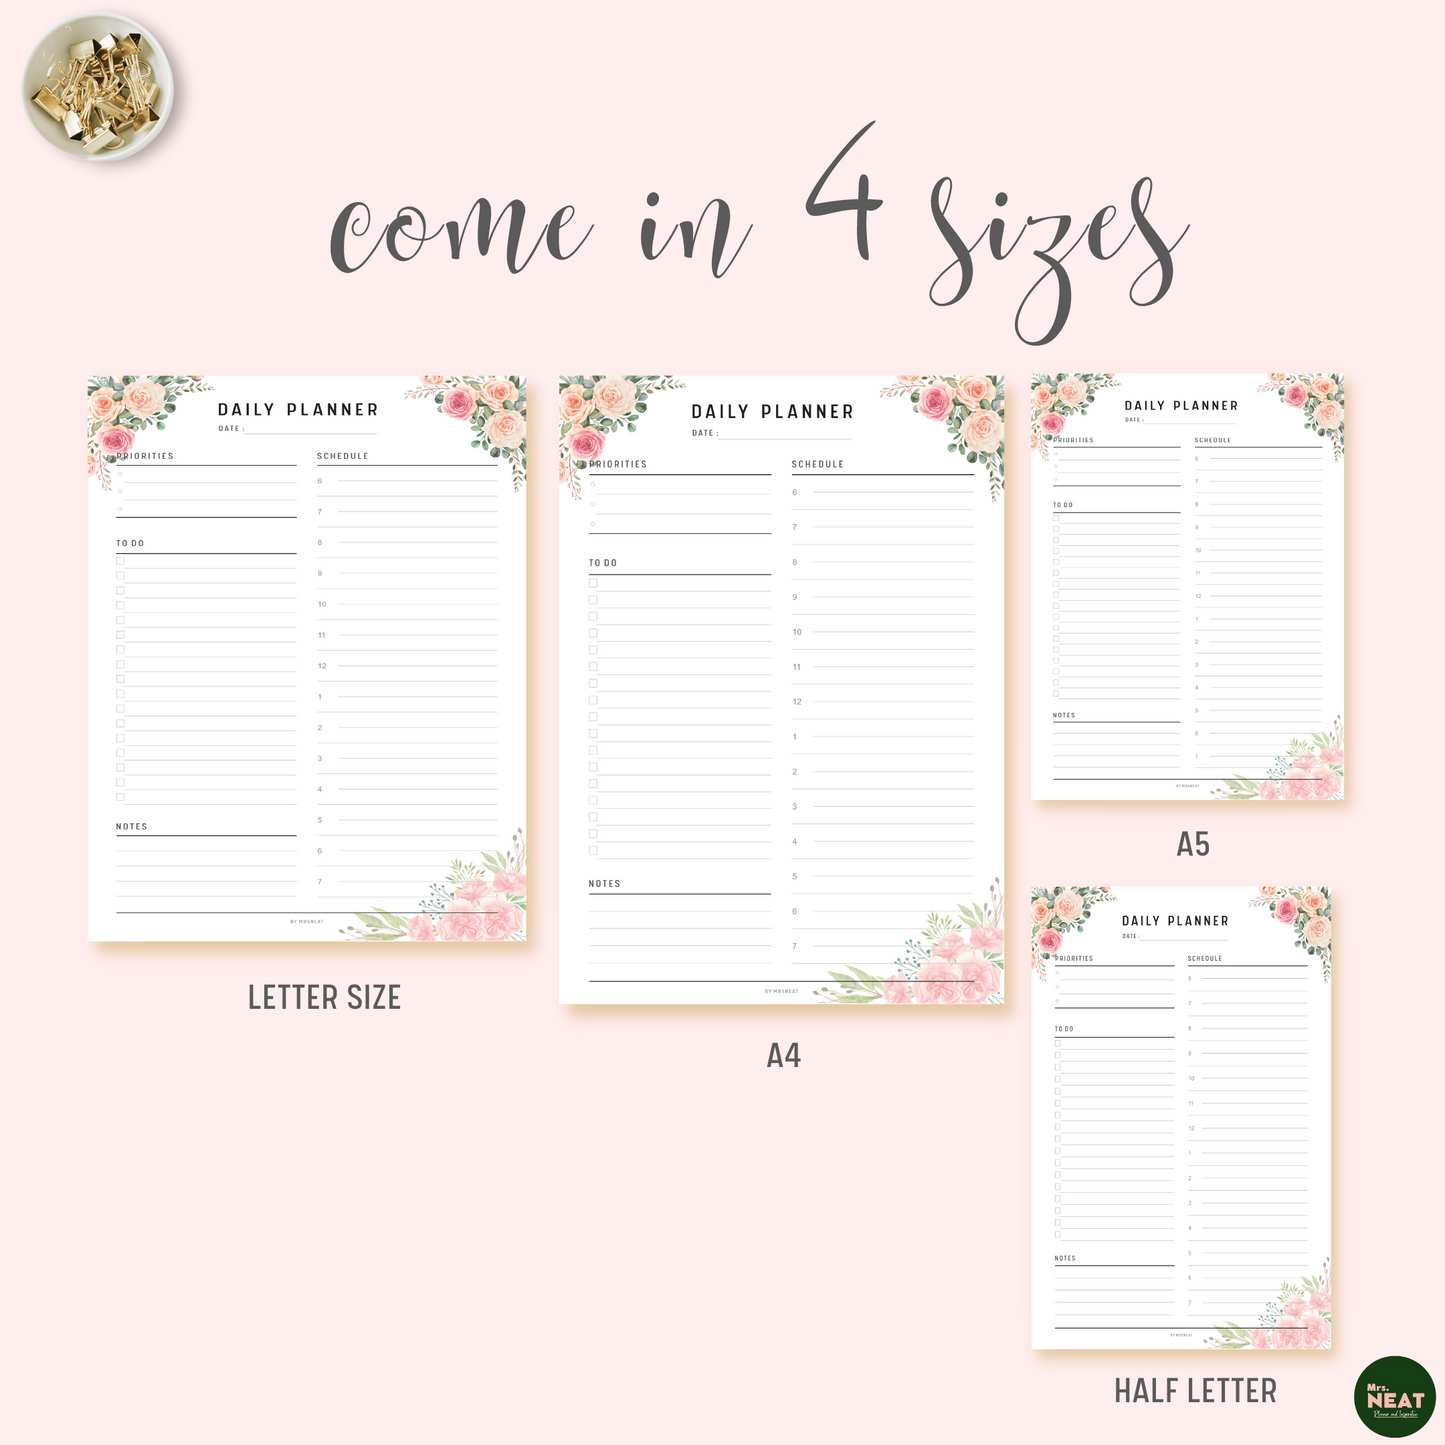 Floral Daily Planner Printable in A4, A5, Letter and Half Letter size